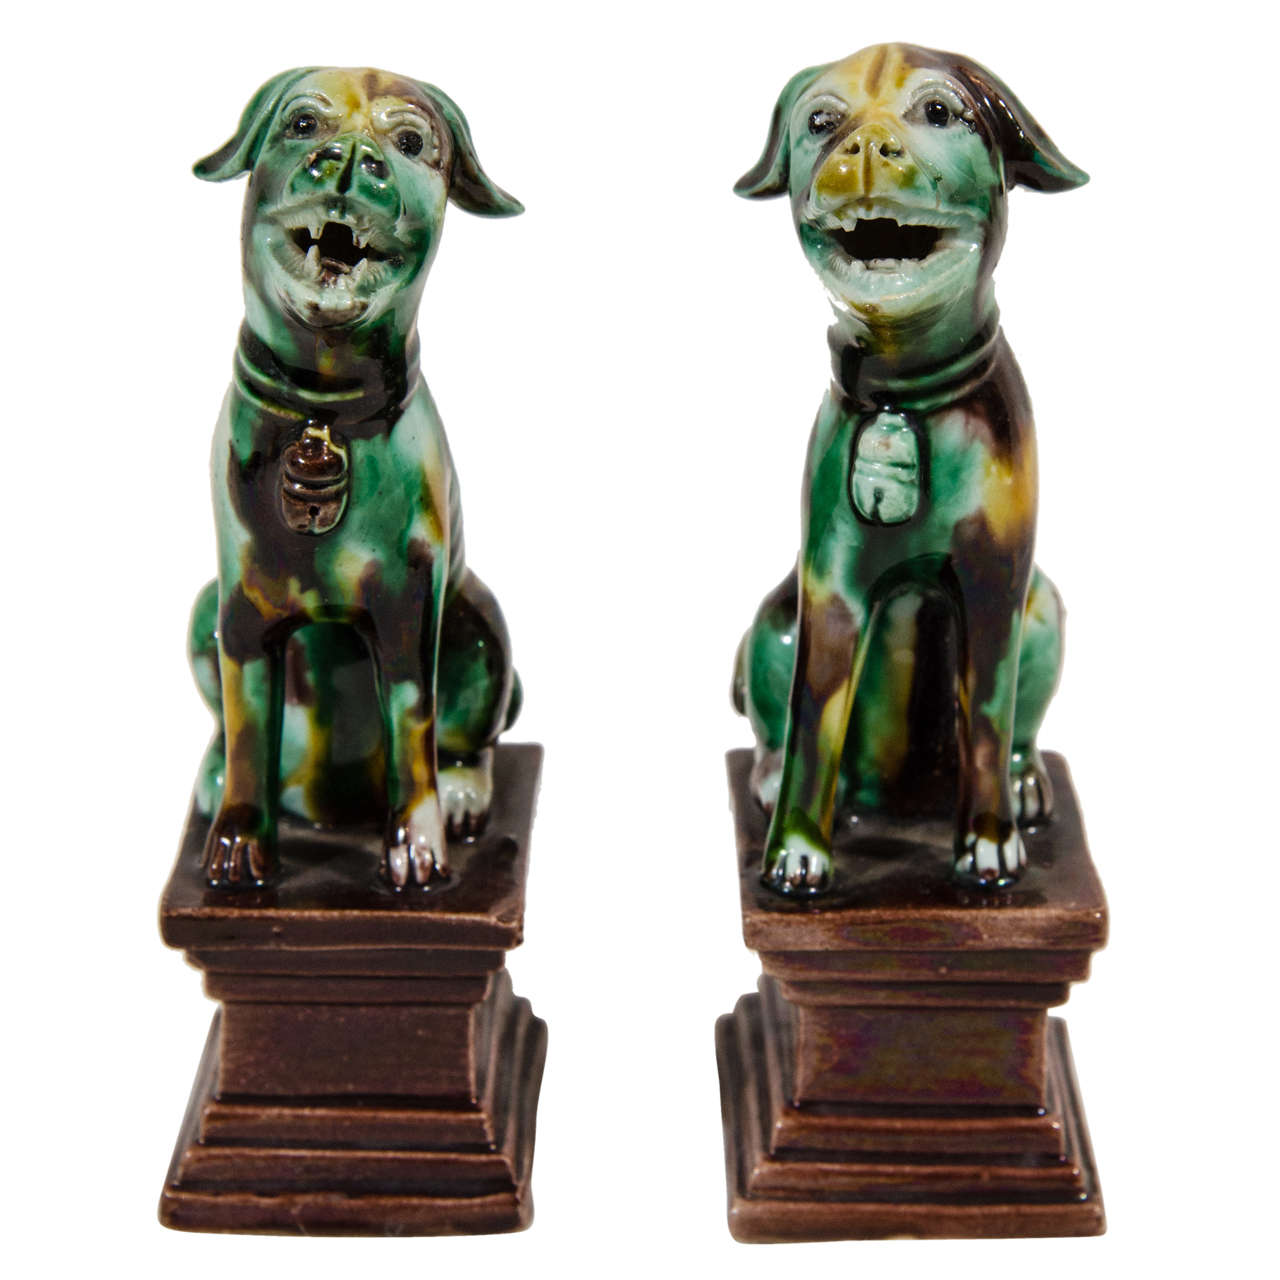 Pair of Chinese Export Dogs Sancai Glazed